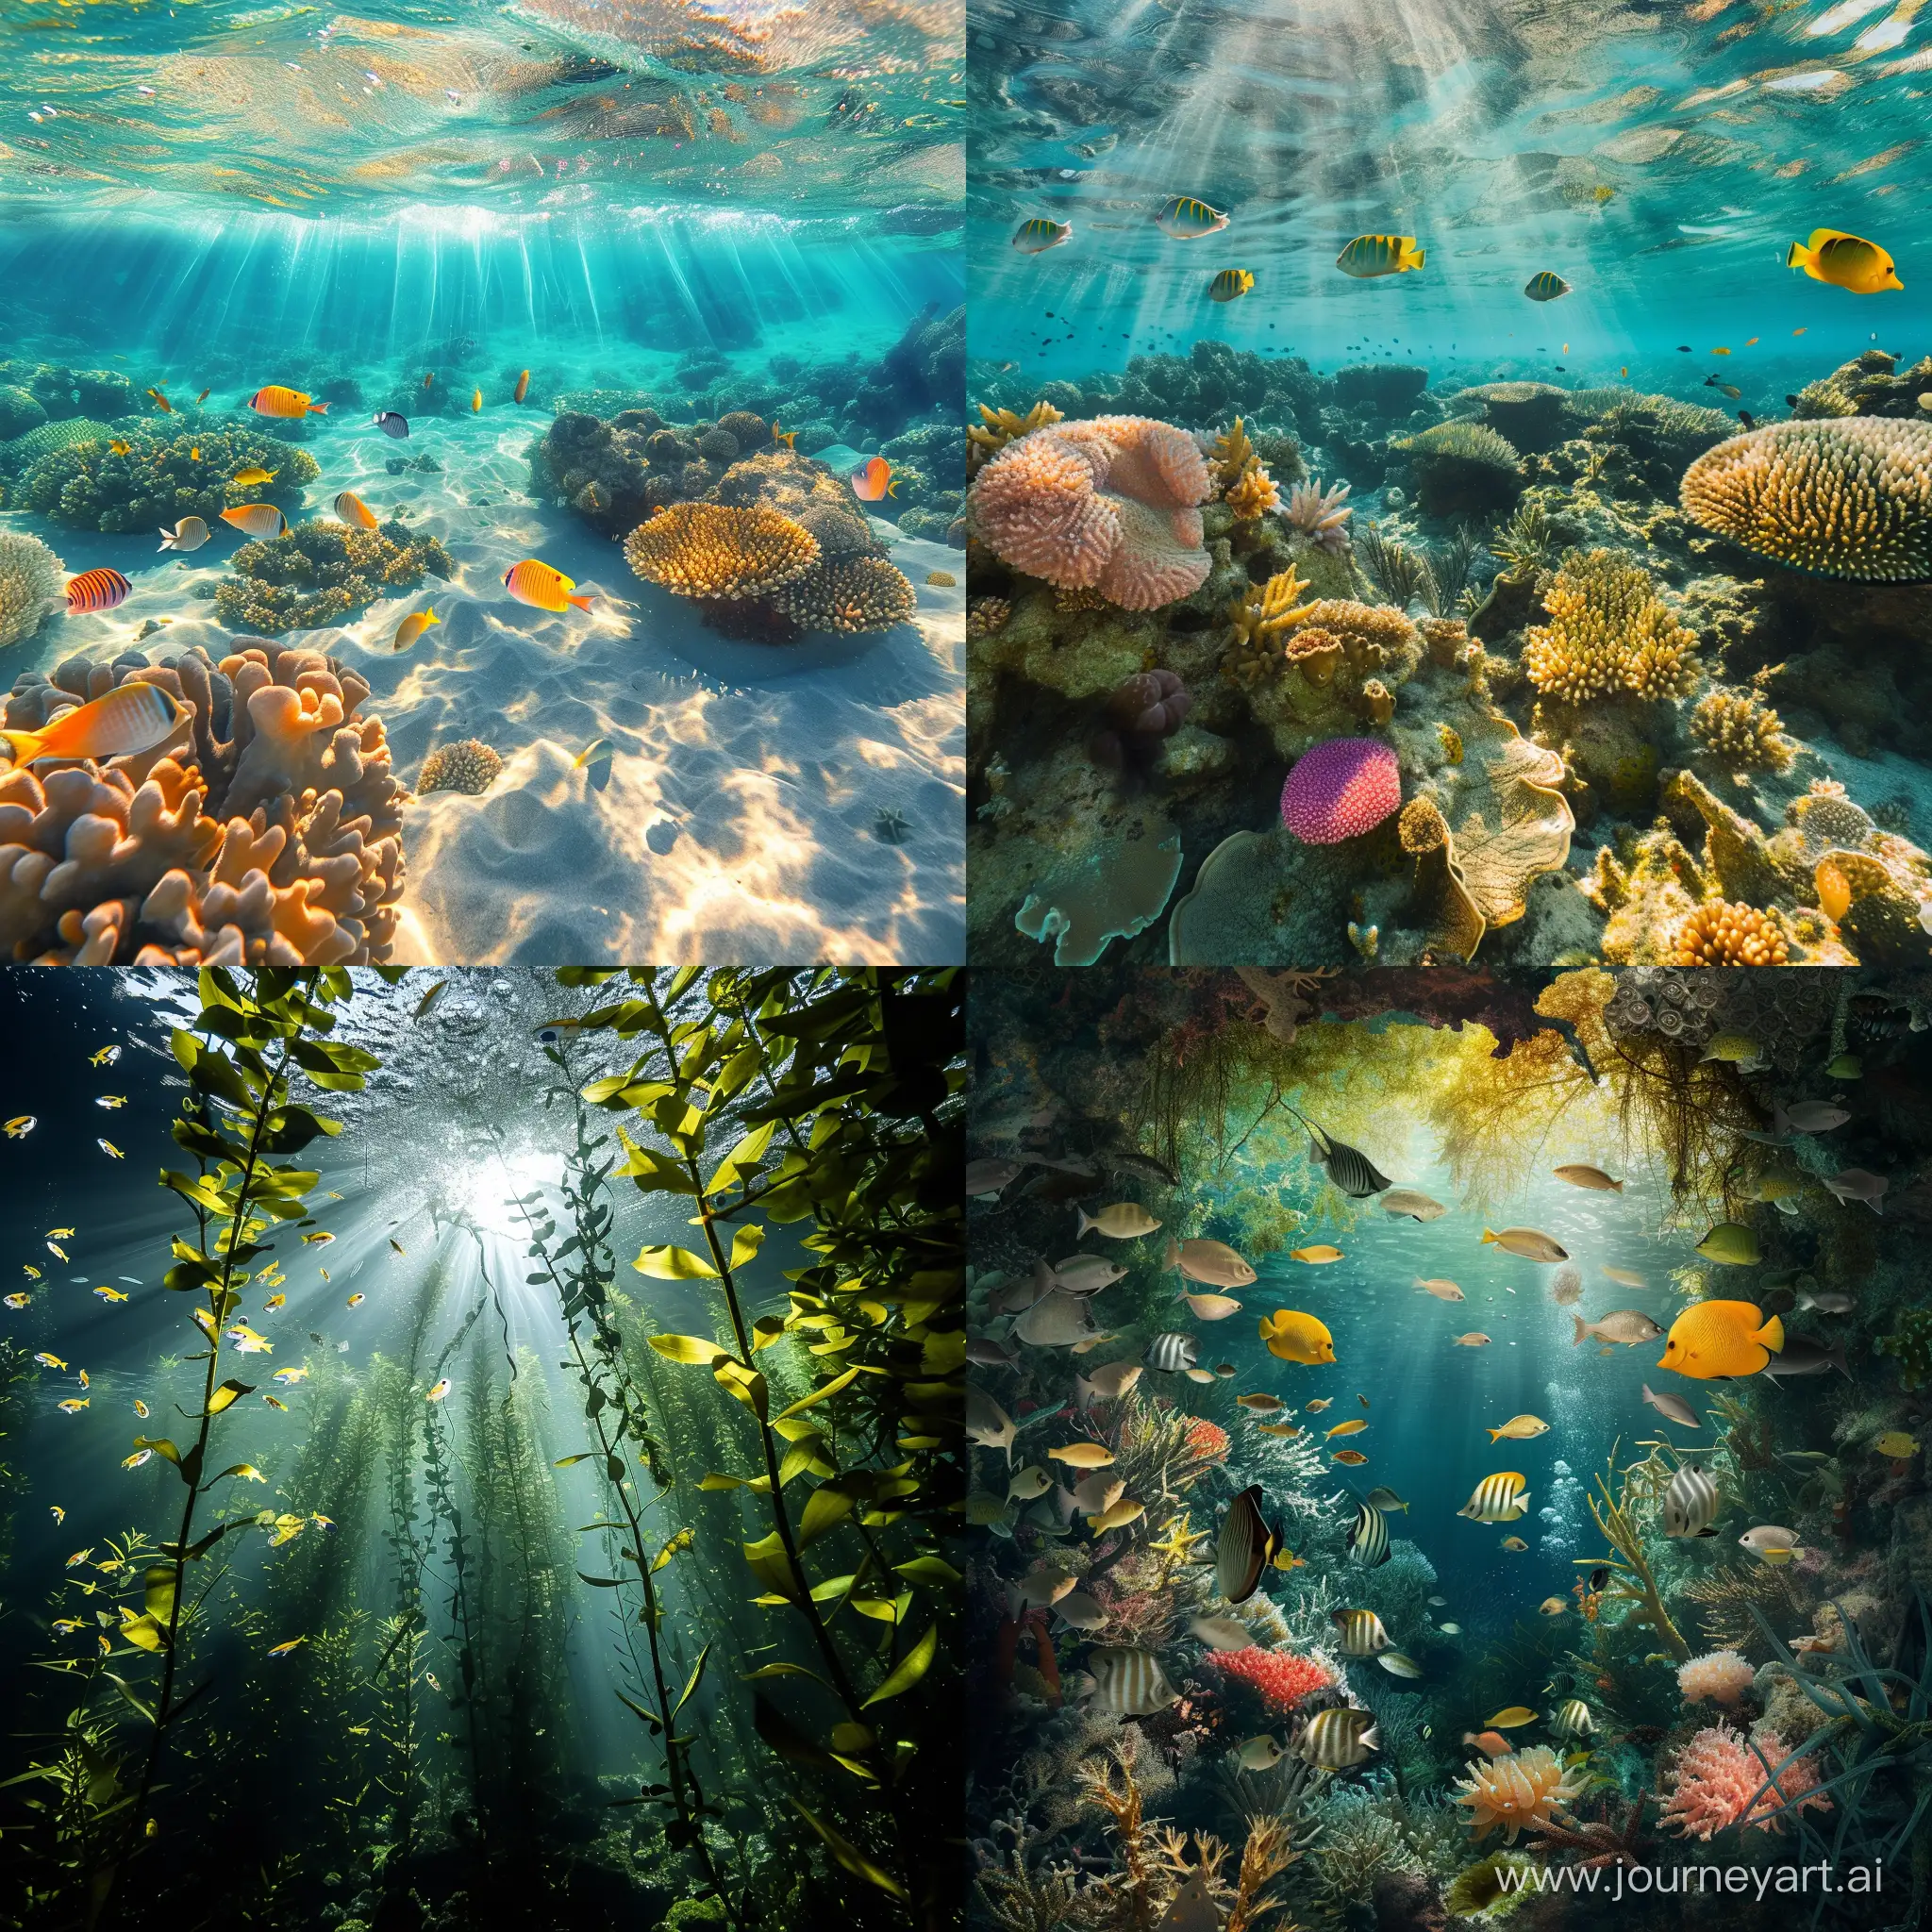 Ecology of the underwater world